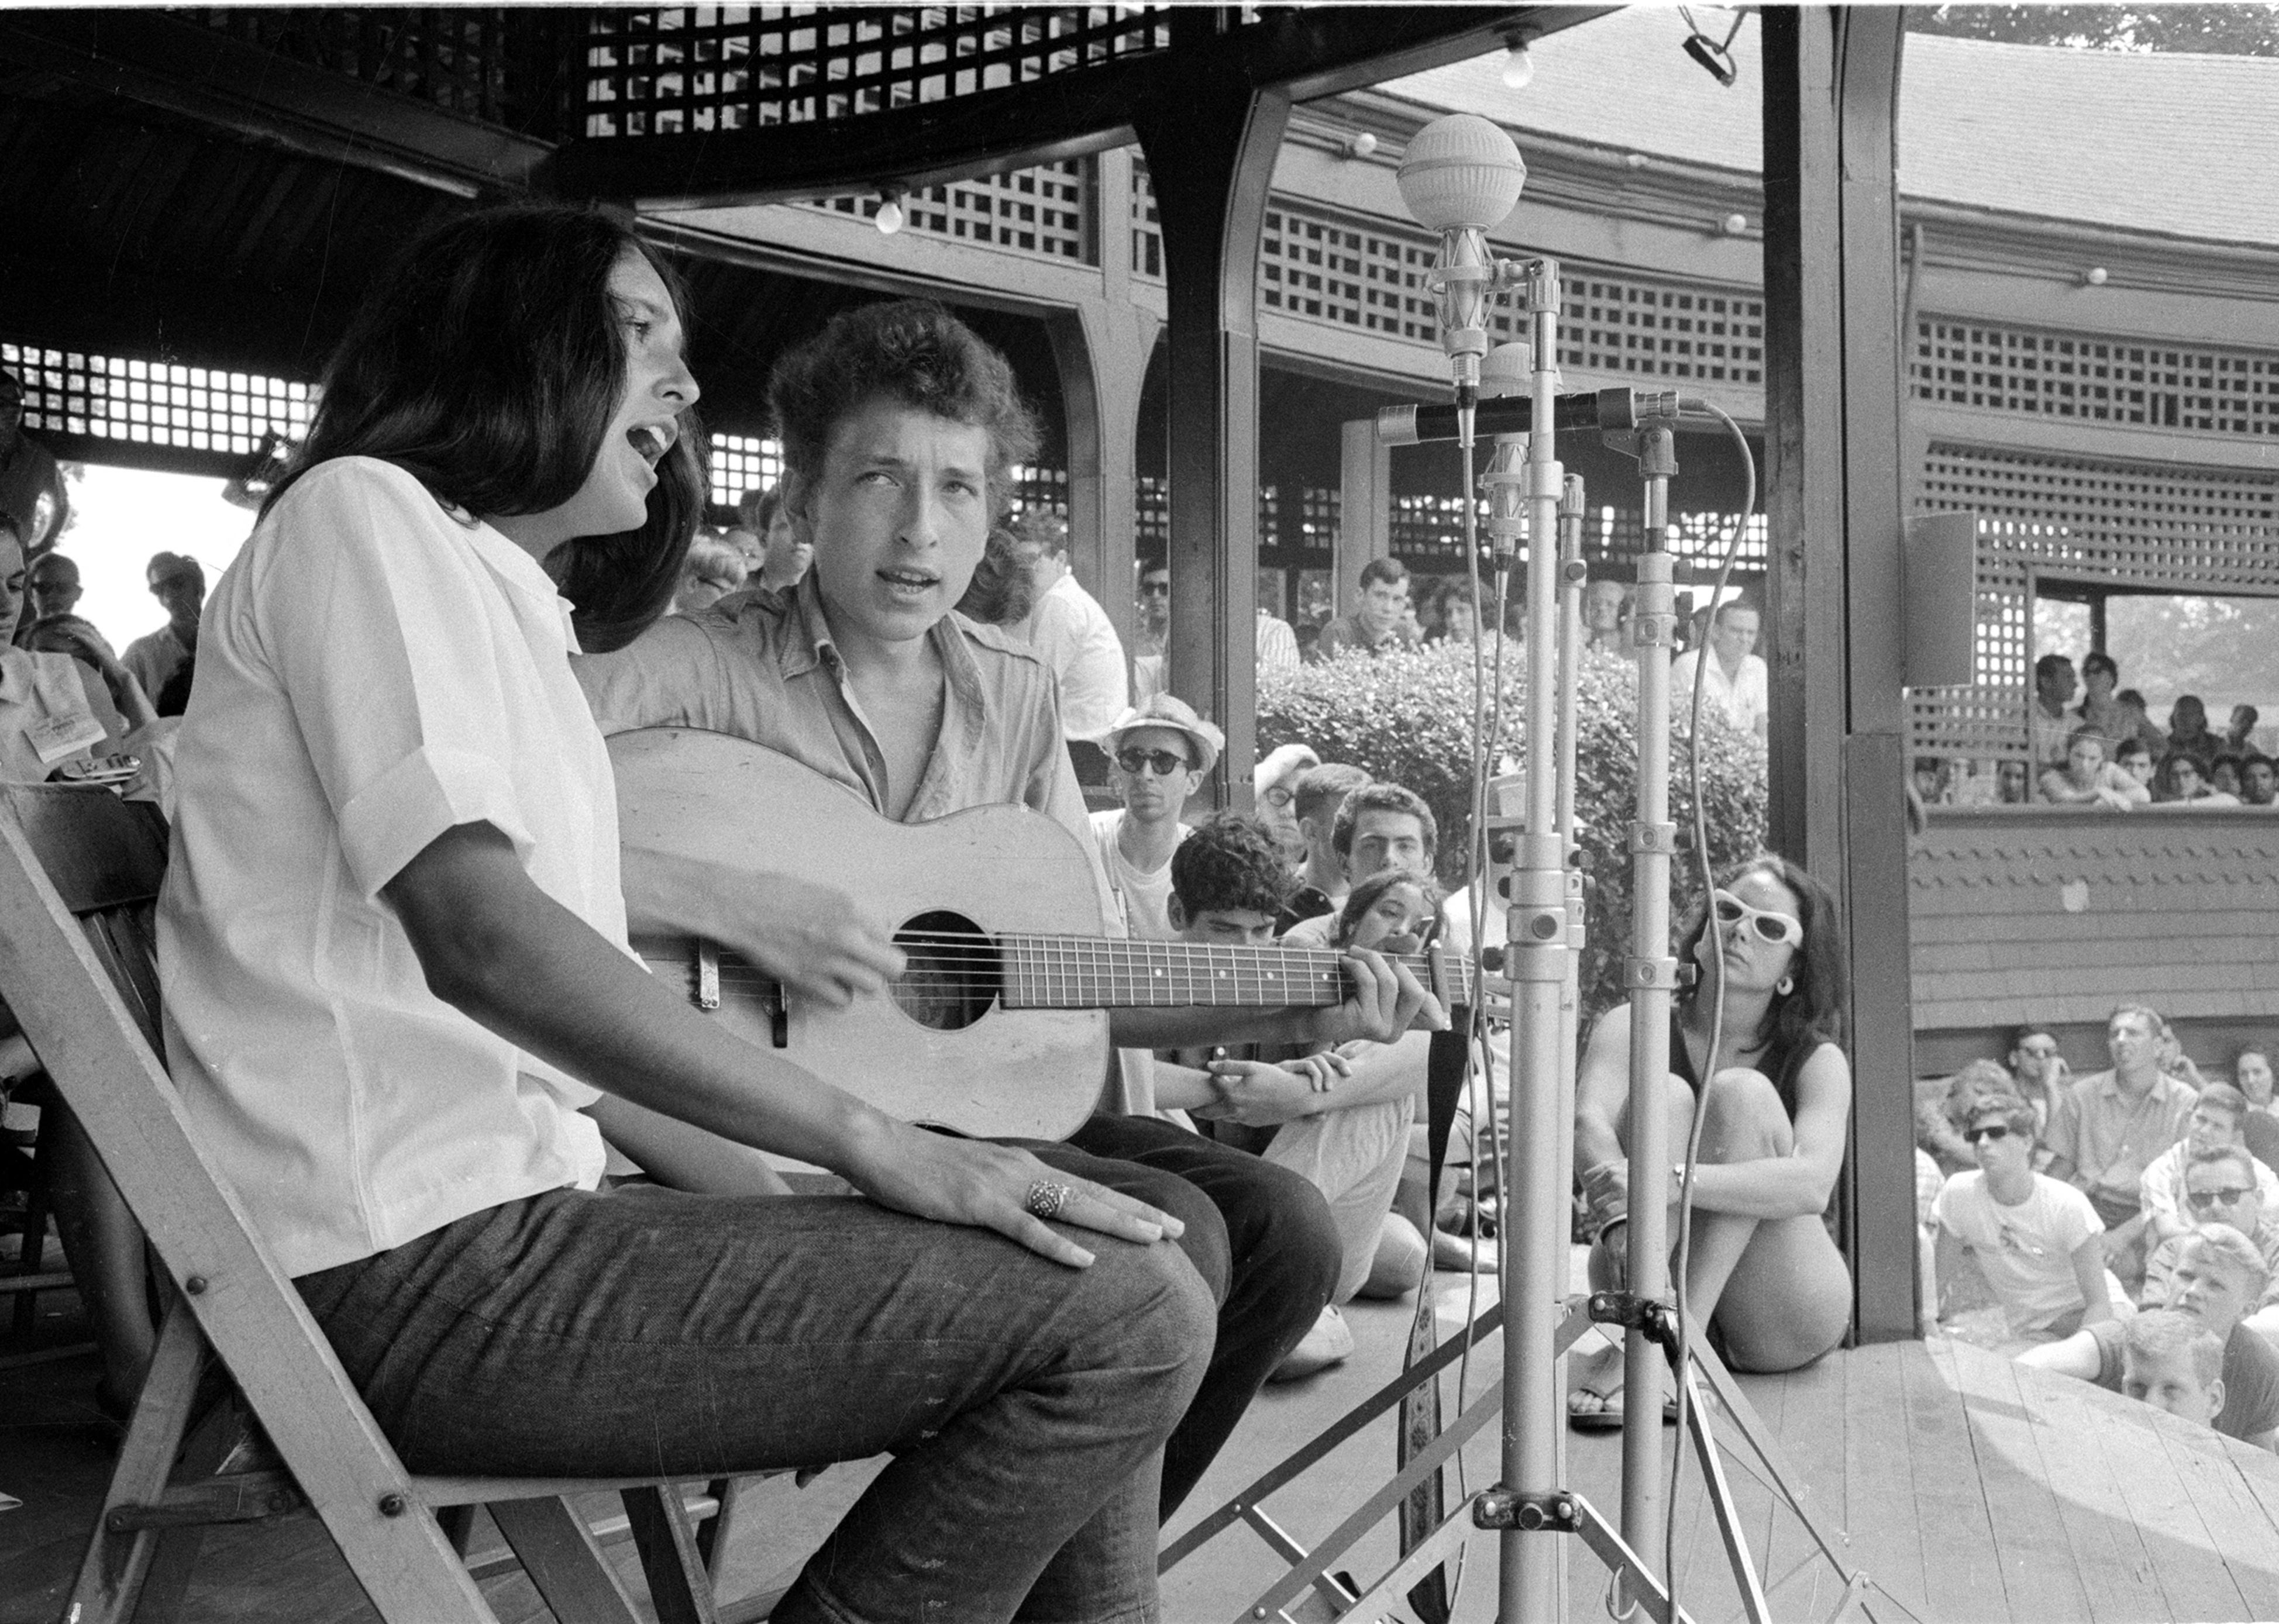 <p>The 1963 Newport Folk Festival arrived when the genre of folk was politically charged and more popular than ever before. Playing the <a href="https://www.bobdylan-comewritersandcritics.com/pages/programmes/dylan-newport-festival-1963.htm">festival for the first time</a>, a young Bob Dylan performed anti-war songs and duly captured the local zeitgeist. Two years later, he shed his spokesman persona at the same festival by <a href="https://www.history.com/this-day-in-history/dylan-goes-electric-at-the-newport-folk-festival">plugging in his electric guitar</a>.</p>